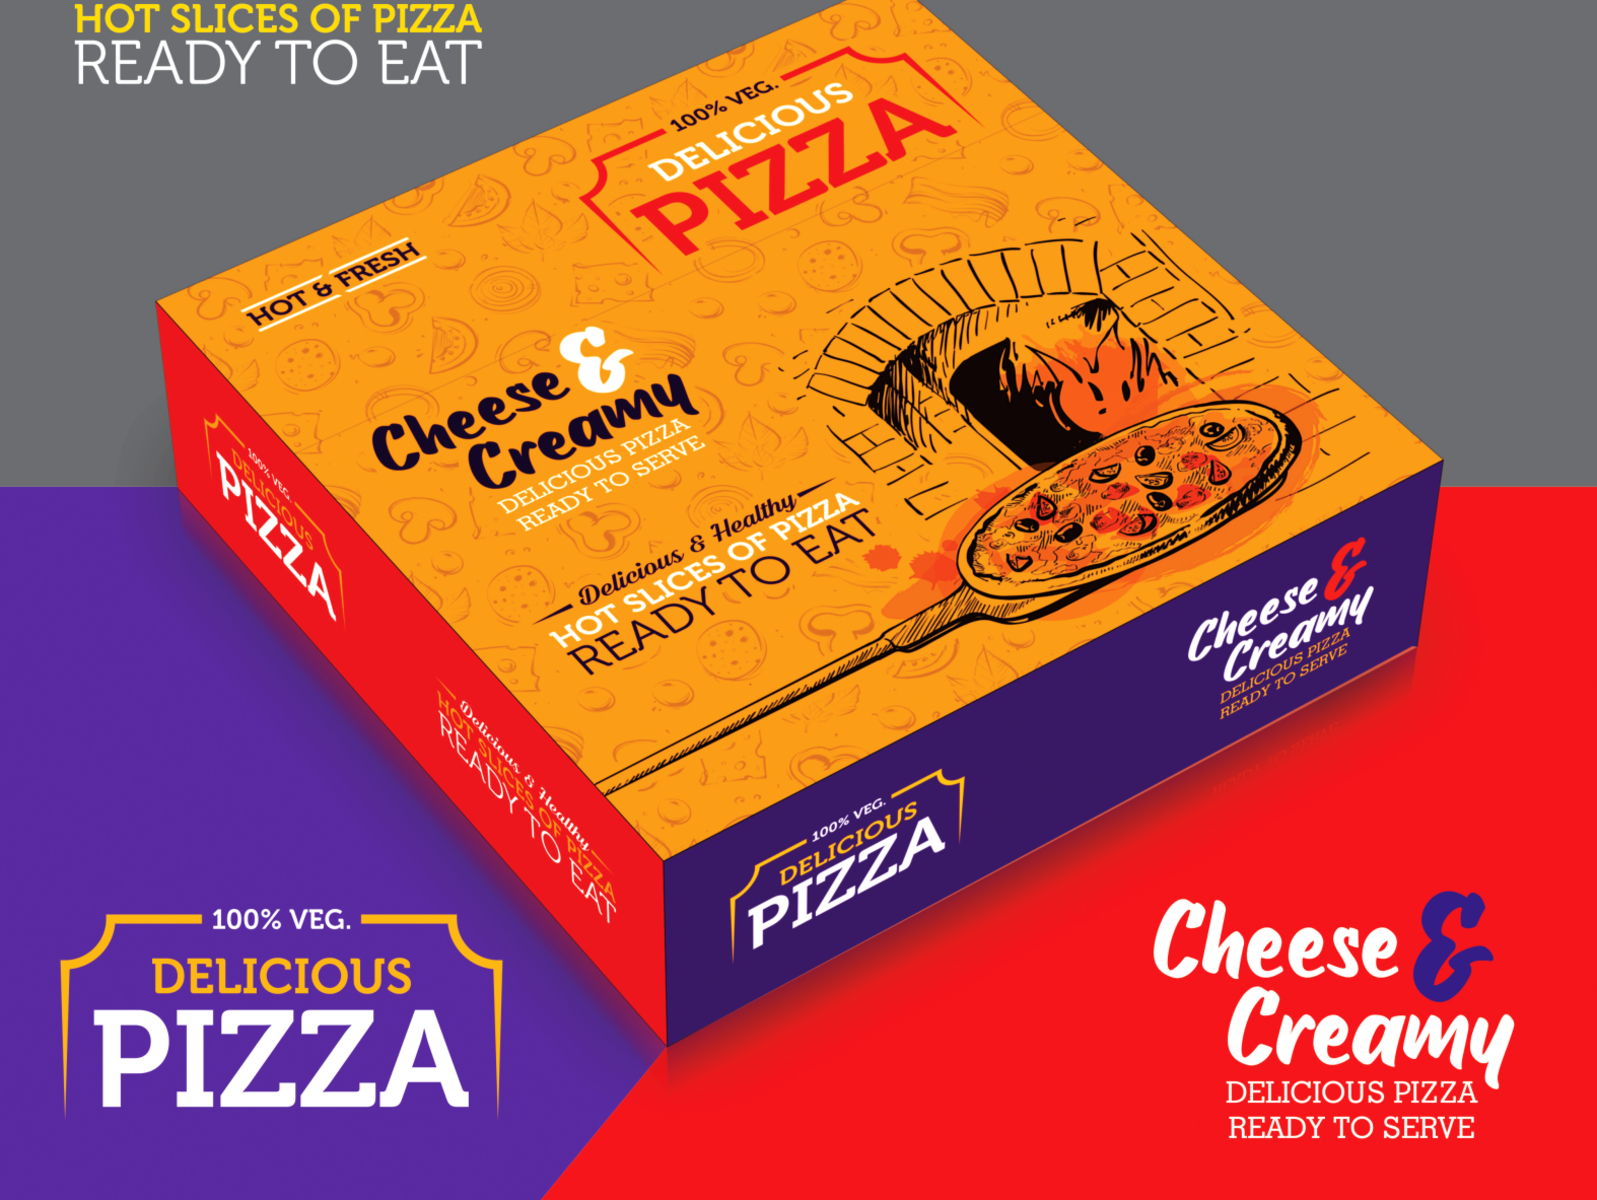 Pizza Box Illustration Packaging Design by Digital Ghumti on Dribbble